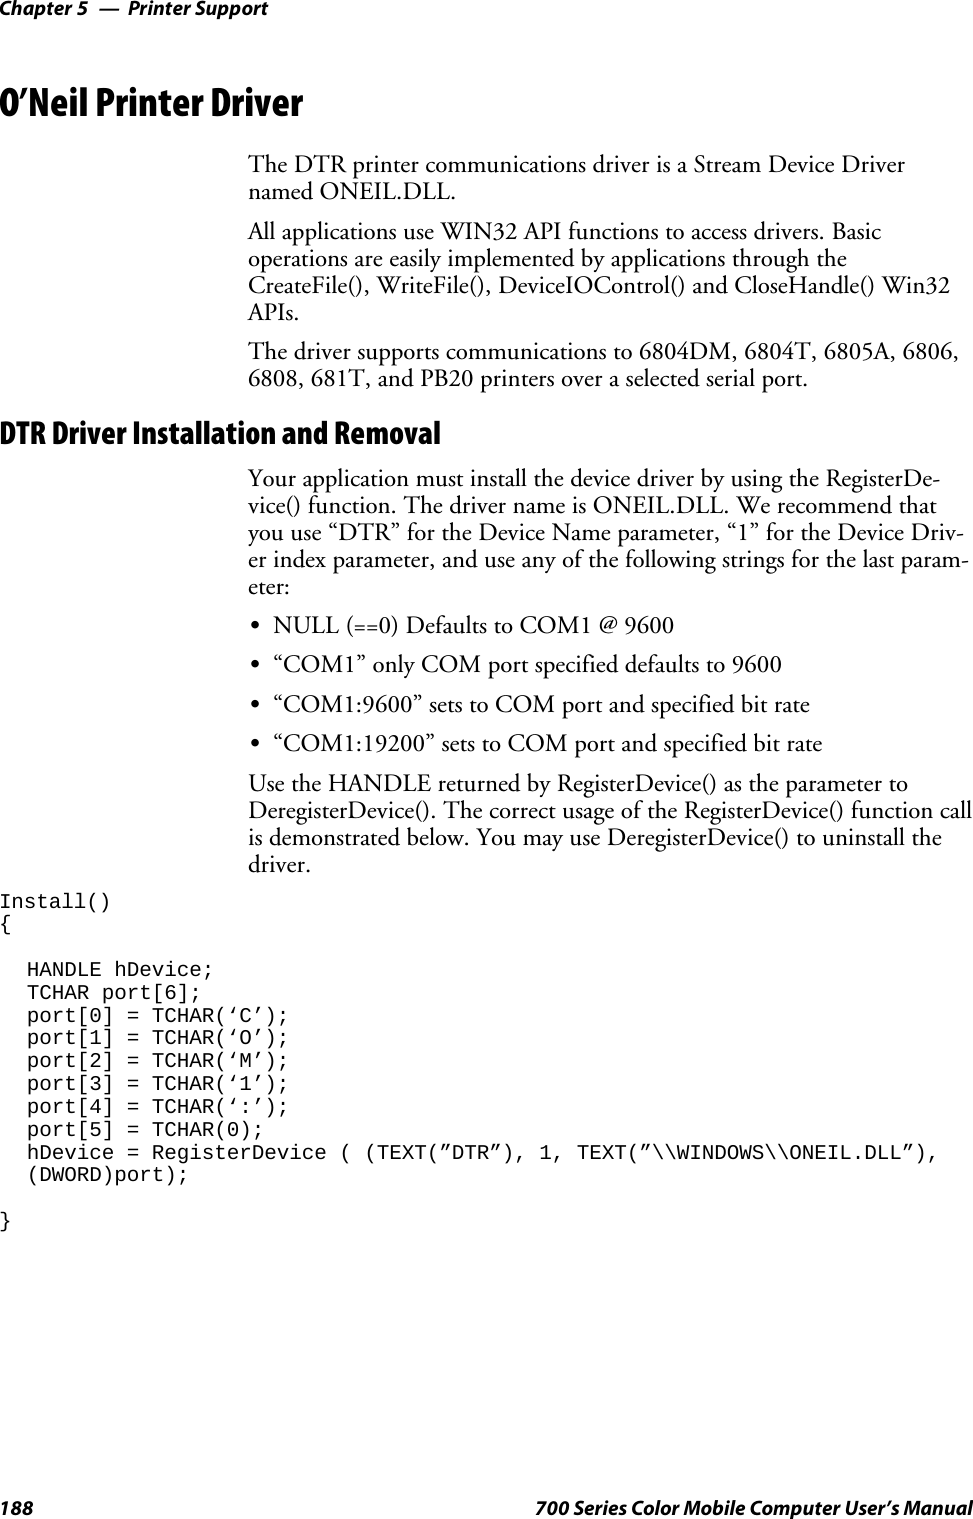 Printer SupportChapter —5188 700 Series Color Mobile Computer User’s ManualO’Neil Printer DriverThe DTR printer communications driver is a Stream Device Drivernamed ONEIL.DLL.All applications use WIN32 API functions to access drivers. Basicoperations are easily implemented by applications through theCreateFile(), WriteFile(), DeviceIOControl() and CloseHandle() Win32APIs.The driver supports communications to 6804DM, 6804T, 6805A, 6806,6808, 681T, and PB20 printers over a selected serial port.DTR Driver Installation and RemovalYour application must install the device driver by using the RegisterDe-vice() function. The driver name is ONEIL.DLL. We recommend thatyou use “DTR” for the Device Name parameter, “1” for the Device Driv-er index parameter, and use any of the following strings for the last param-eter:SNULL (==0) Defaults to COM1 @ 9600S“COM1” only COM port specified defaults to 9600S“COM1:9600” sets to COM port and specified bit rateS“COM1:19200” sets to COM port and specified bit rateUse the HANDLE returned by RegisterDevice() as the parameter toDeregisterDevice(). The correct usage of the RegisterDevice() function callis demonstrated below. You may use DeregisterDevice() to uninstall thedriver.Install(){HANDLE hDevice;TCHAR port[6];port[0] = TCHAR(‘C’);port[1] = TCHAR(‘O’);port[2] = TCHAR(‘M’);port[3] = TCHAR(‘1’);port[4] = TCHAR(‘:’);port[5] = TCHAR(0);hDevice = RegisterDevice ( (TEXT(”DTR”), 1, TEXT(”\\WINDOWS\\ONEIL.DLL”),(DWORD)port);}